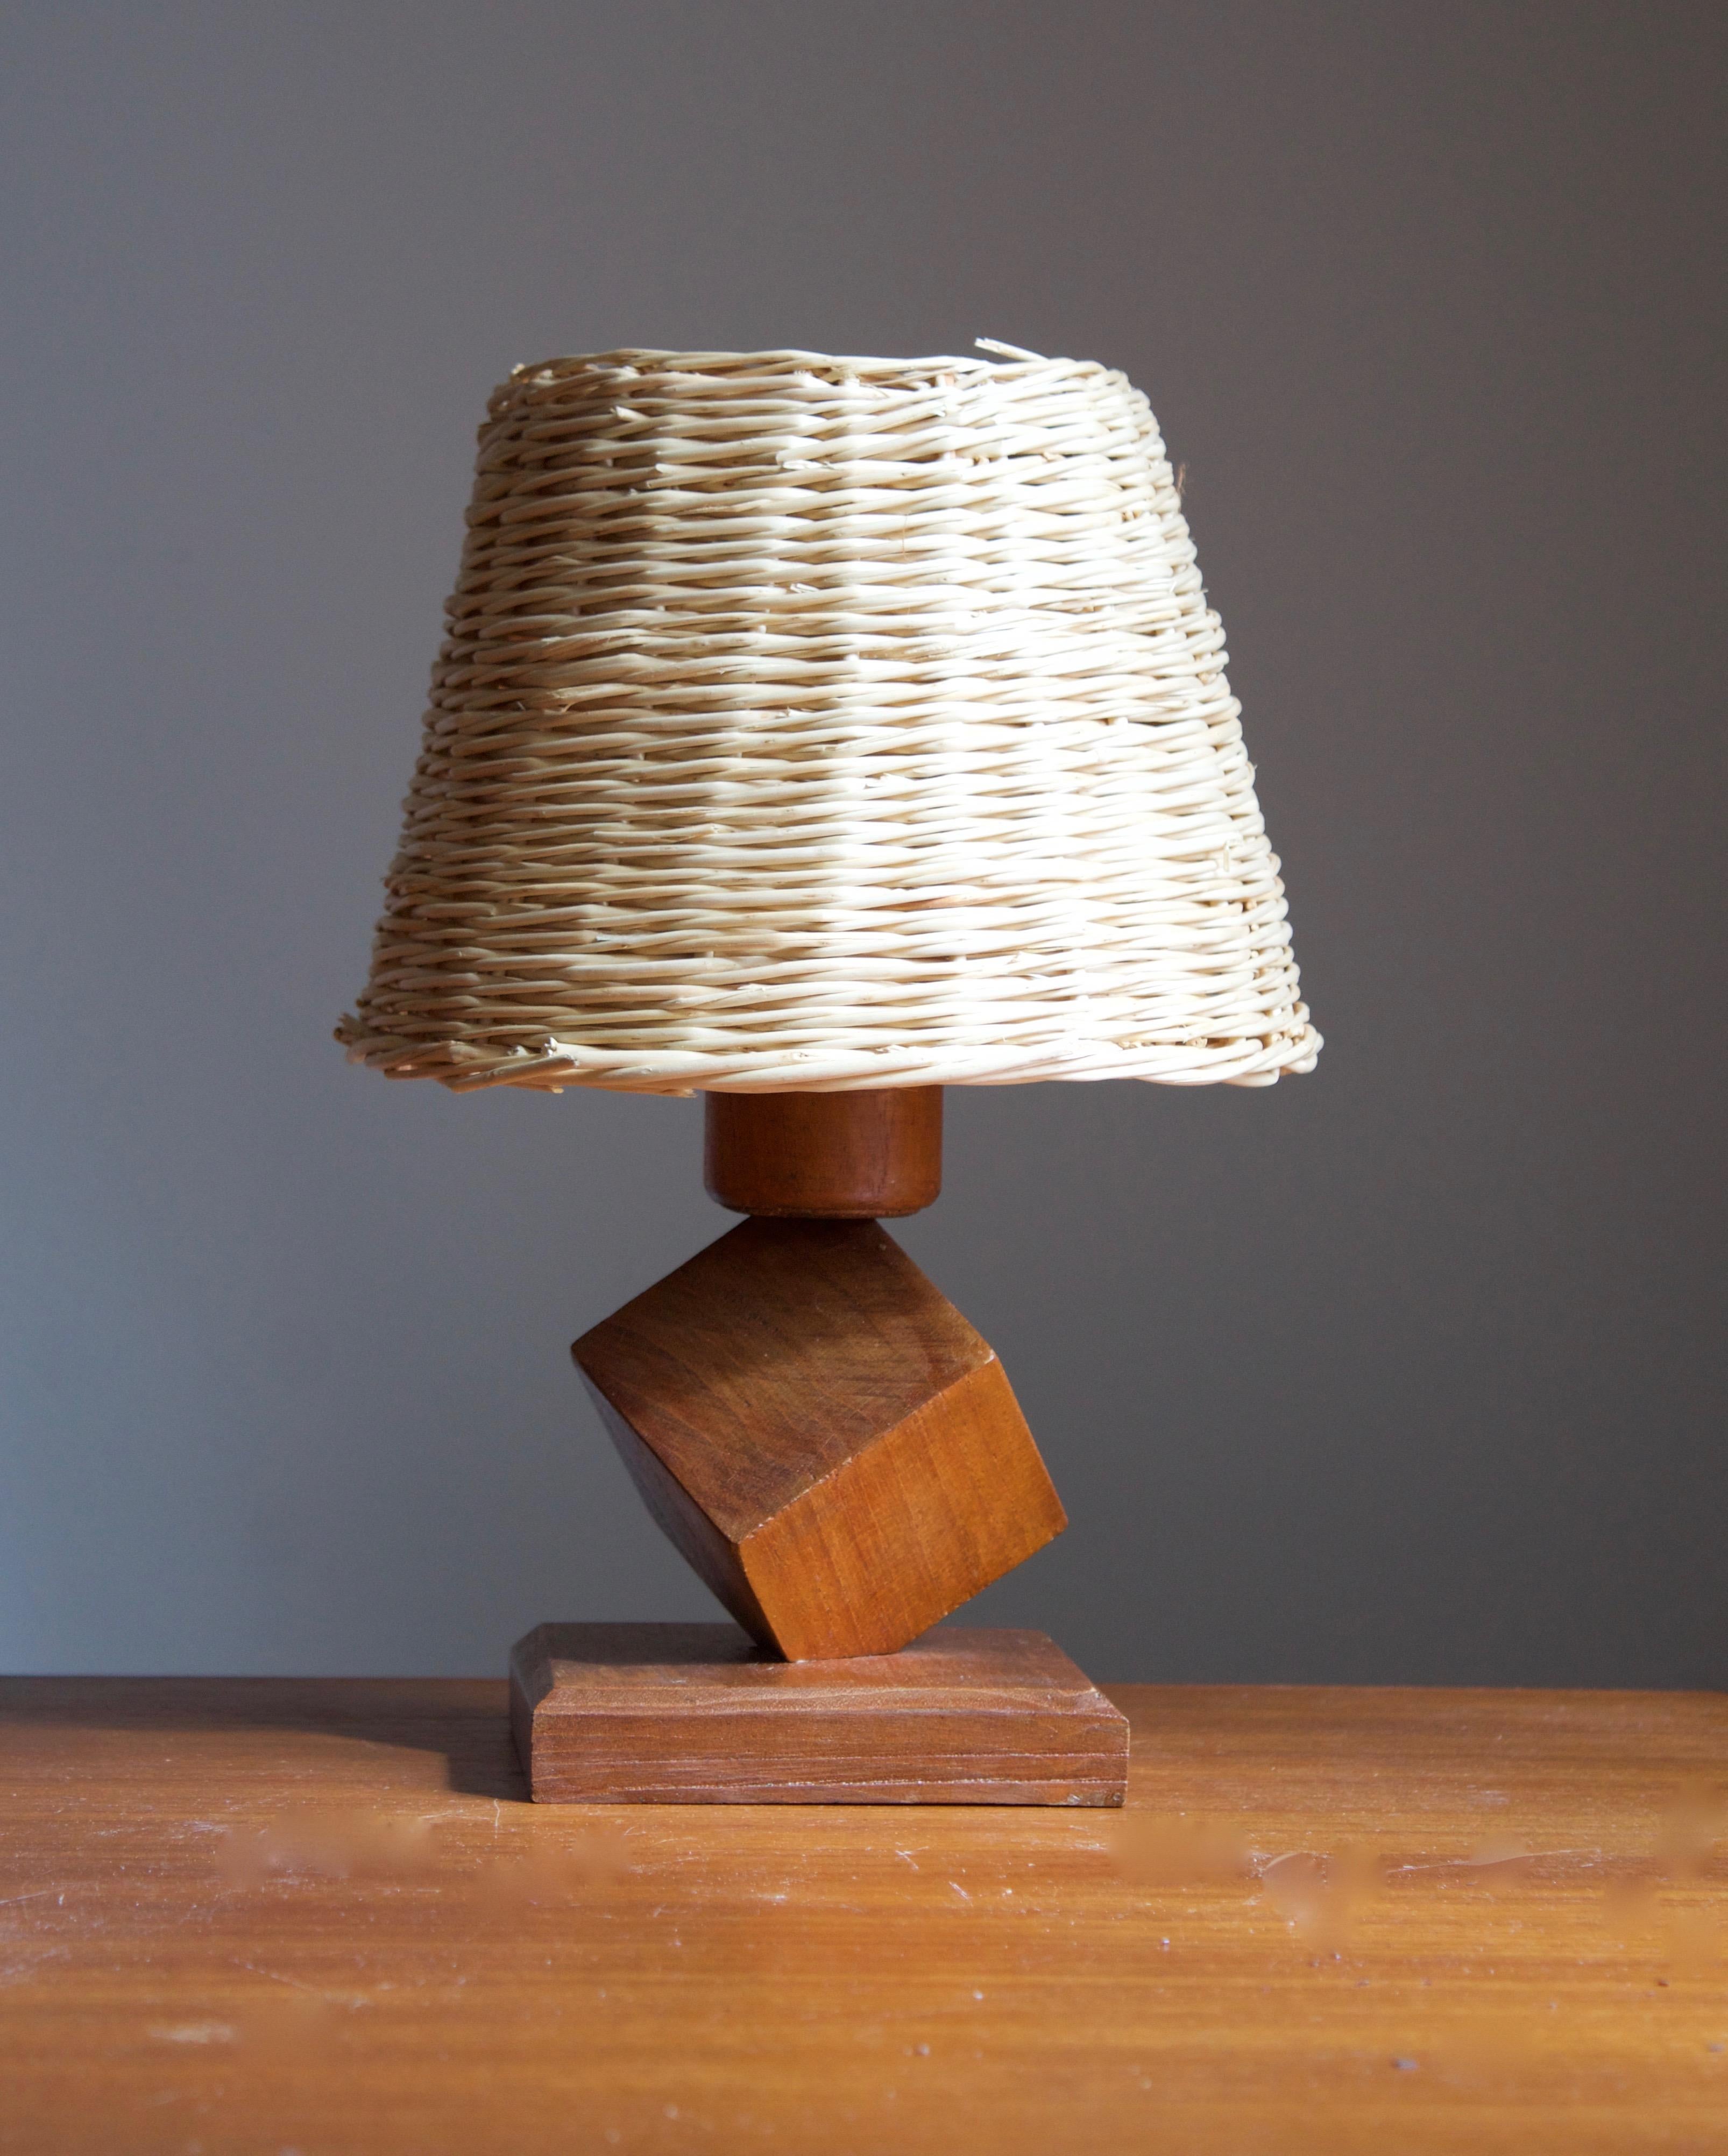 A table lamp designed and produced in Sweden in, c. 1960s.

Stated dimensions exclude lampshade, height includes the socket. Assorted vintage lampshade can be included in purchase upon request.